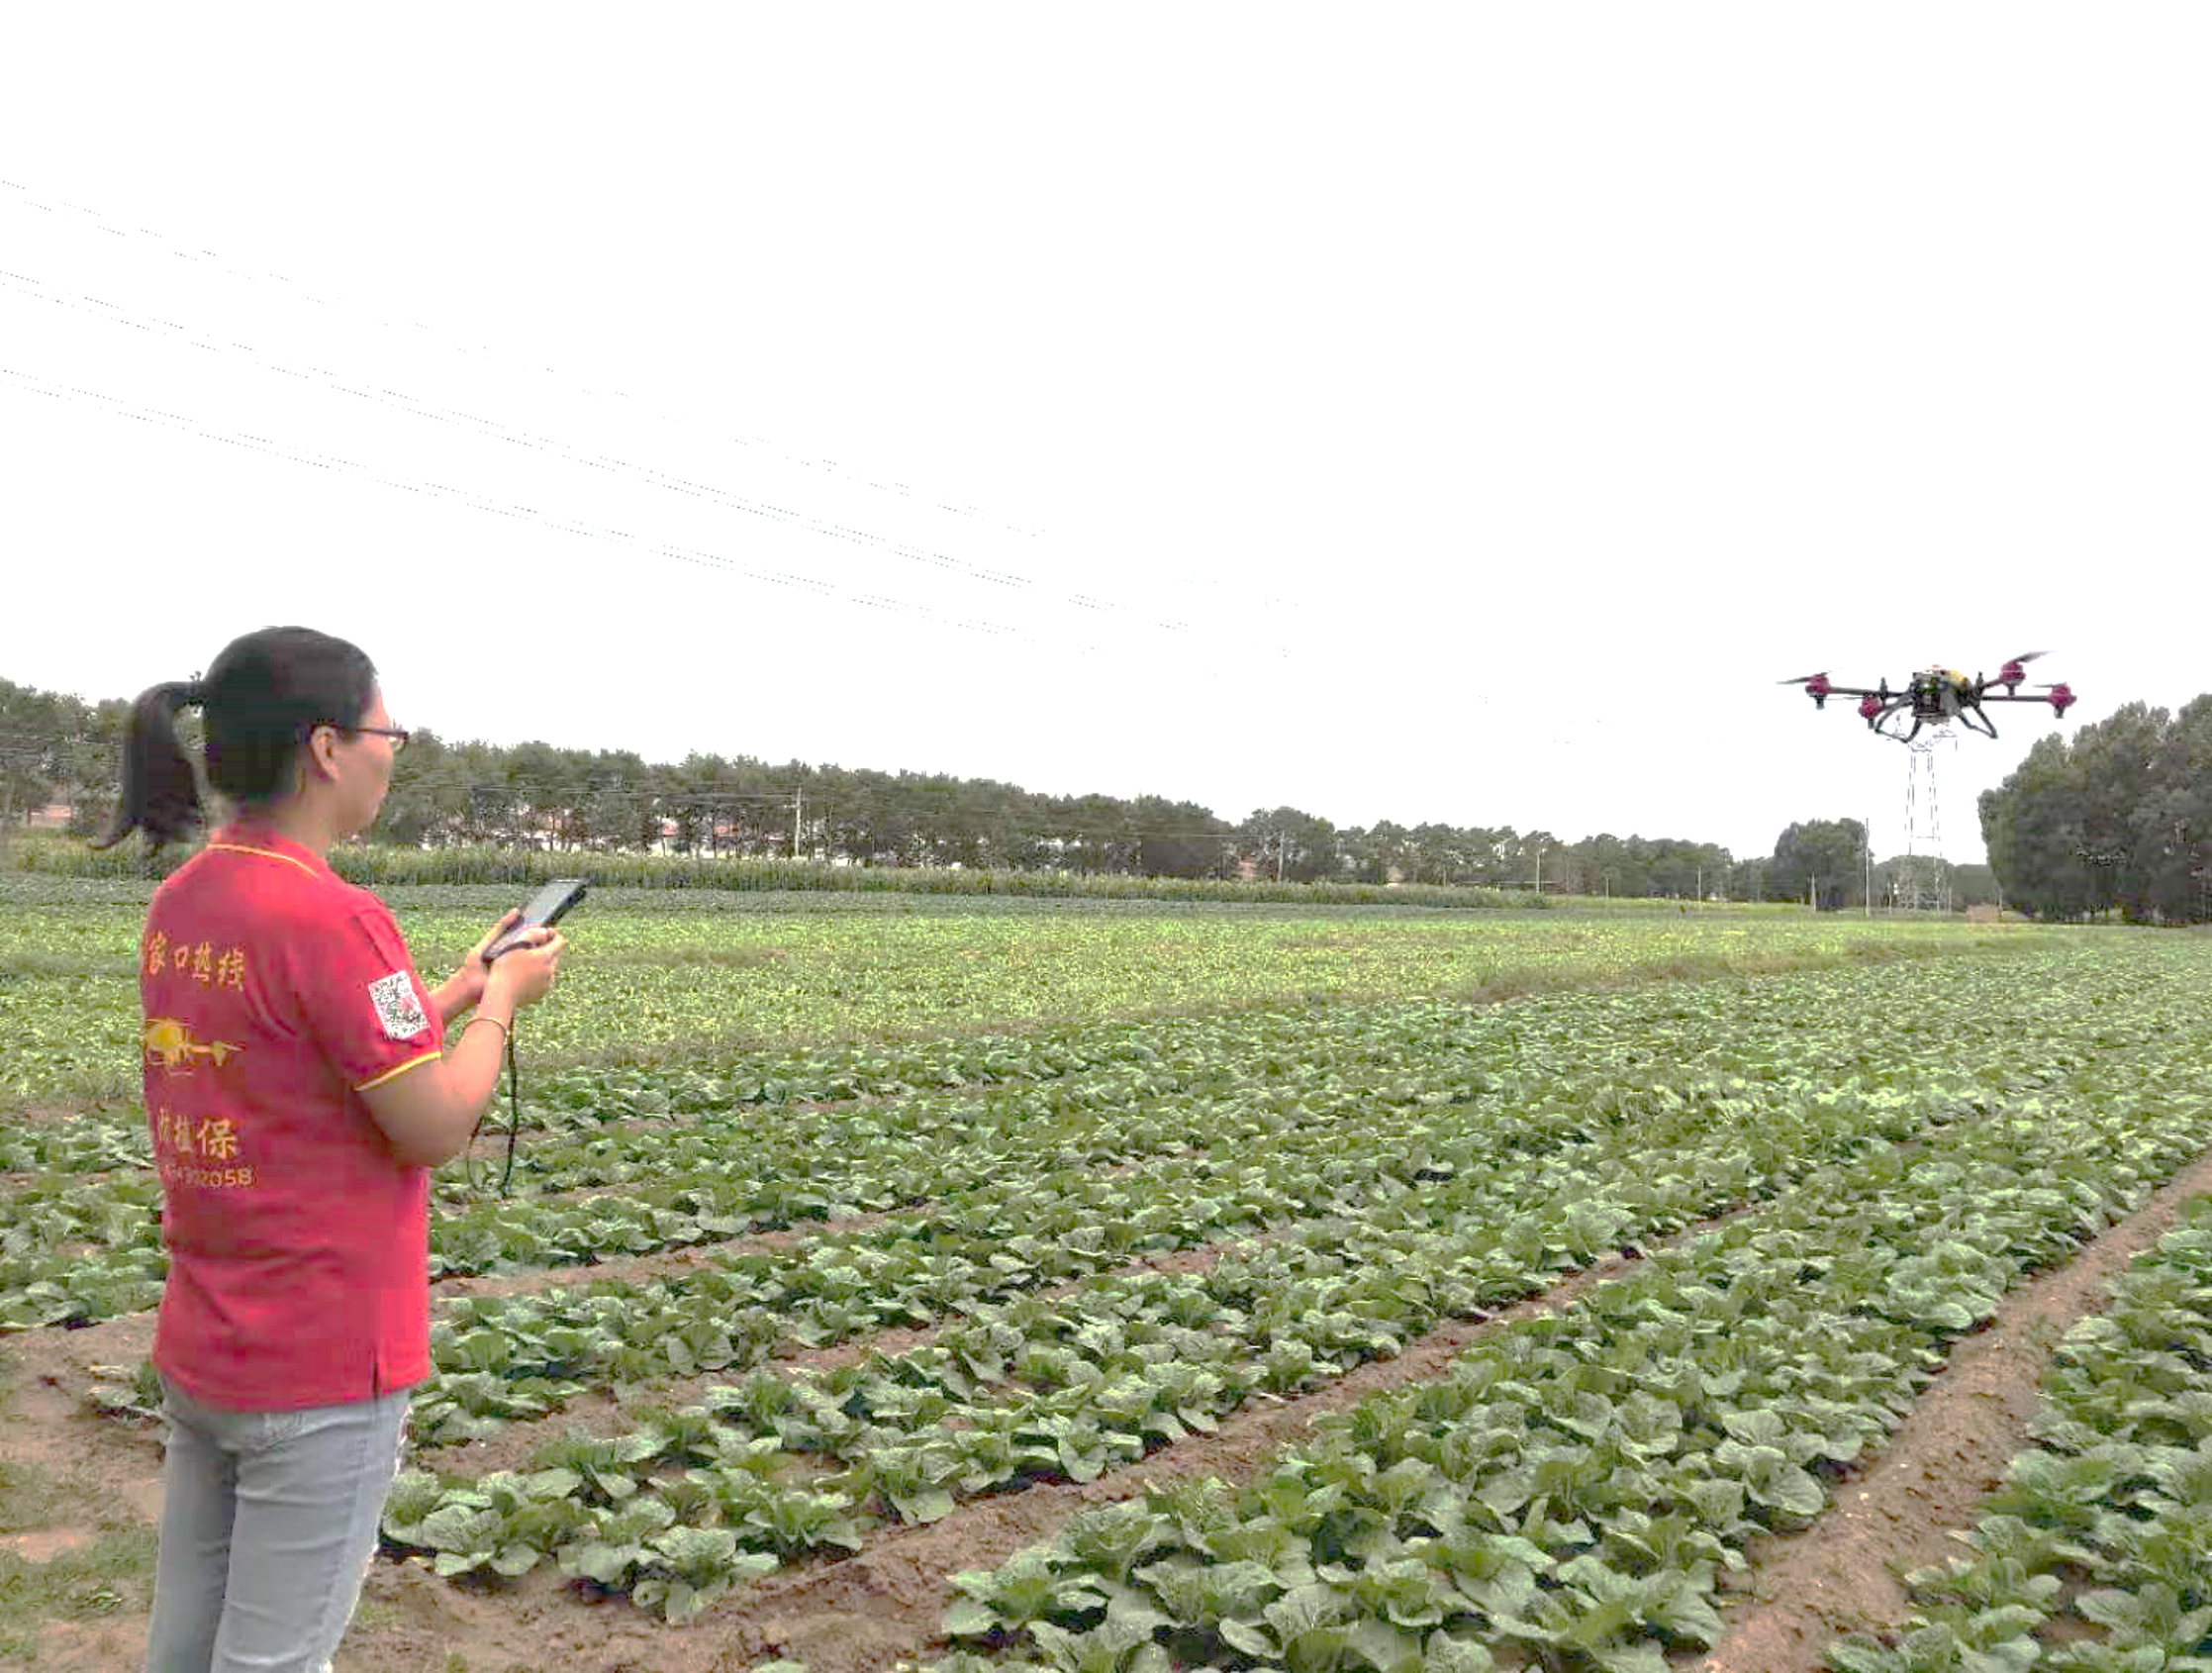 Sheng Guangning operated XAG's P Series plant protection drone